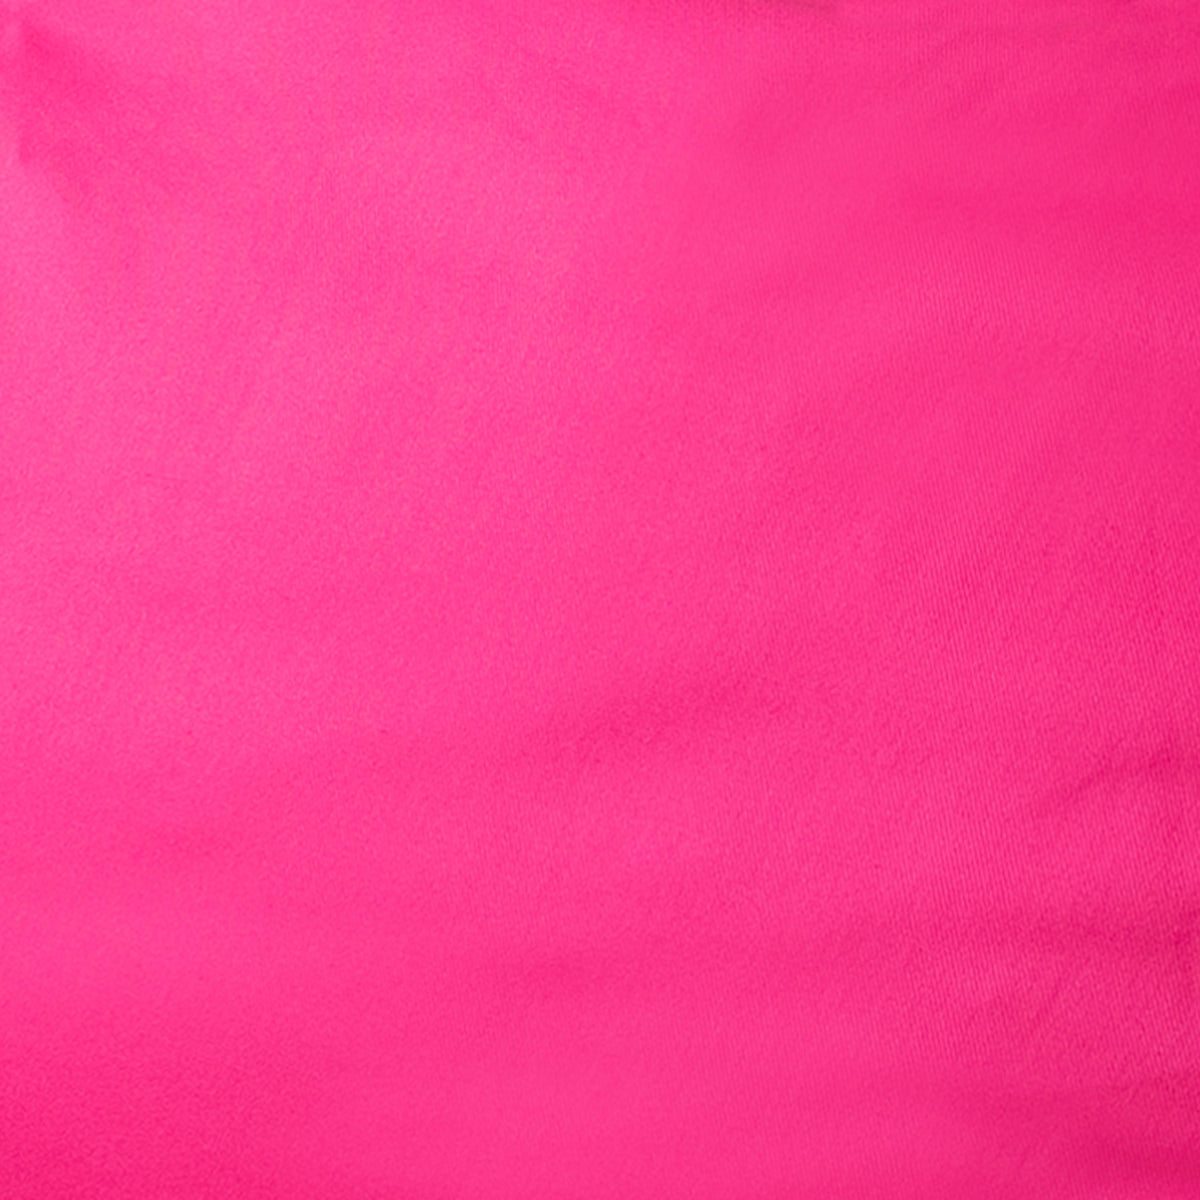 Hot Pink |#| Oversized Solid Hot Pink Refillable Bean Bag Chair for All Ages